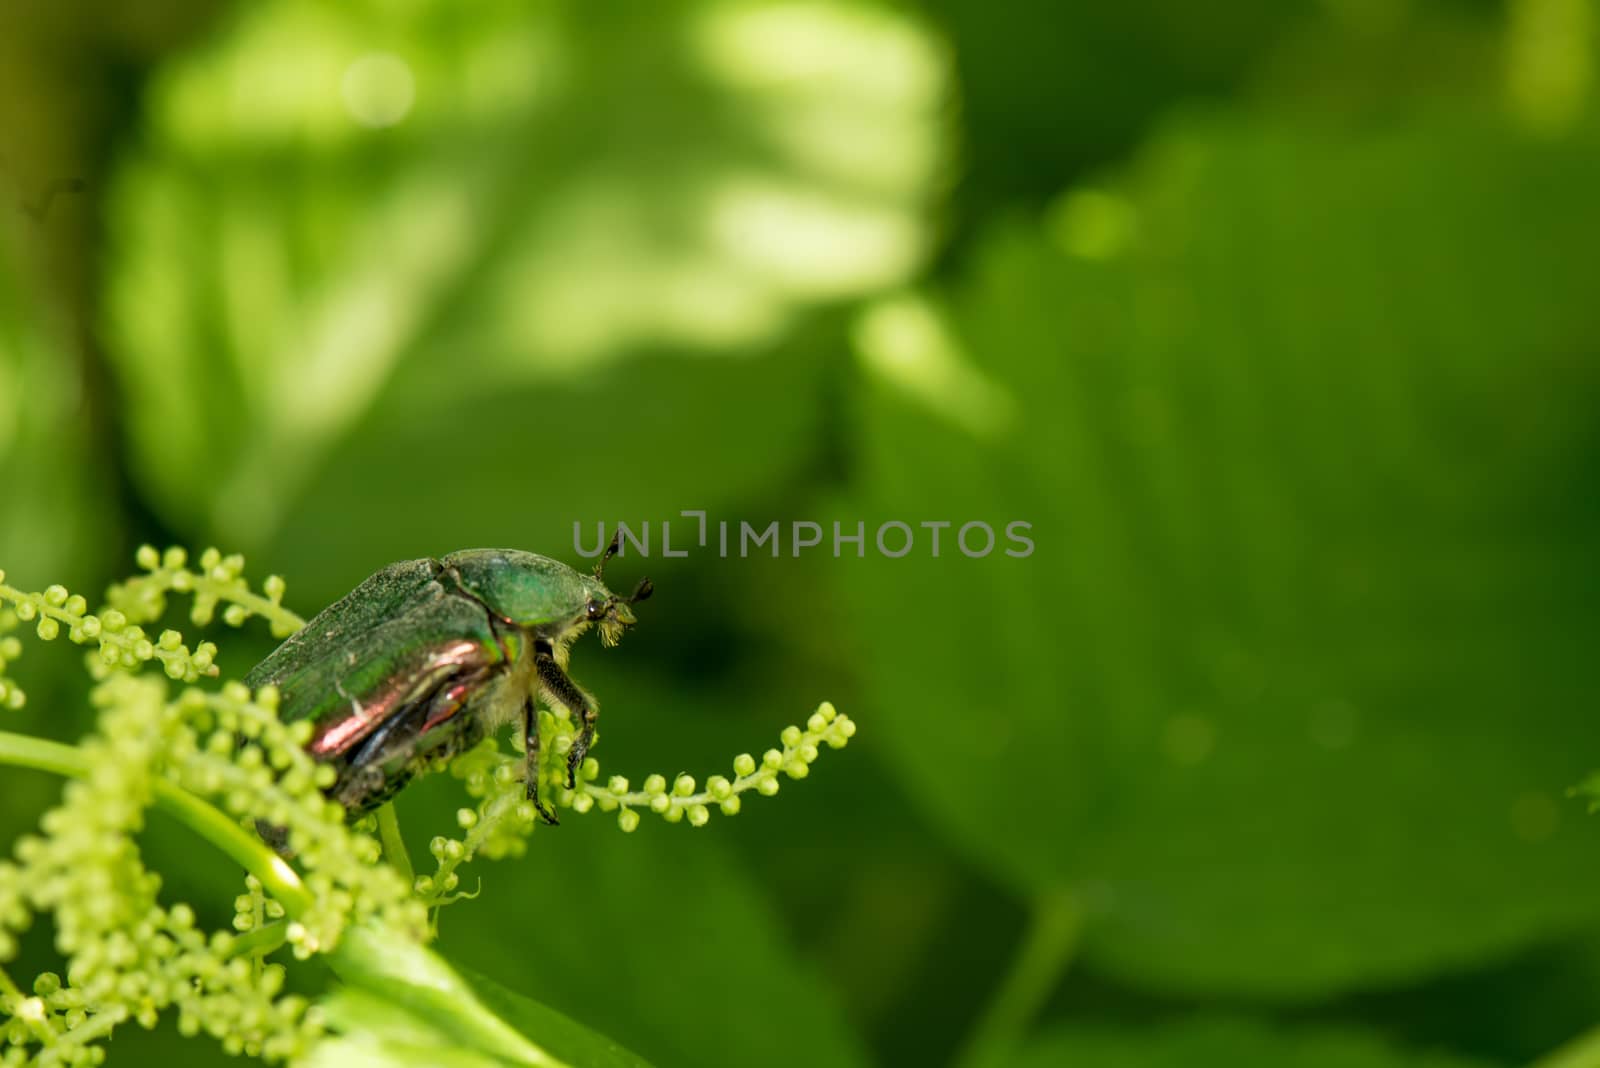 Flower Chafer (Cetonia aurata) on blurry leaves background by dsmsoft